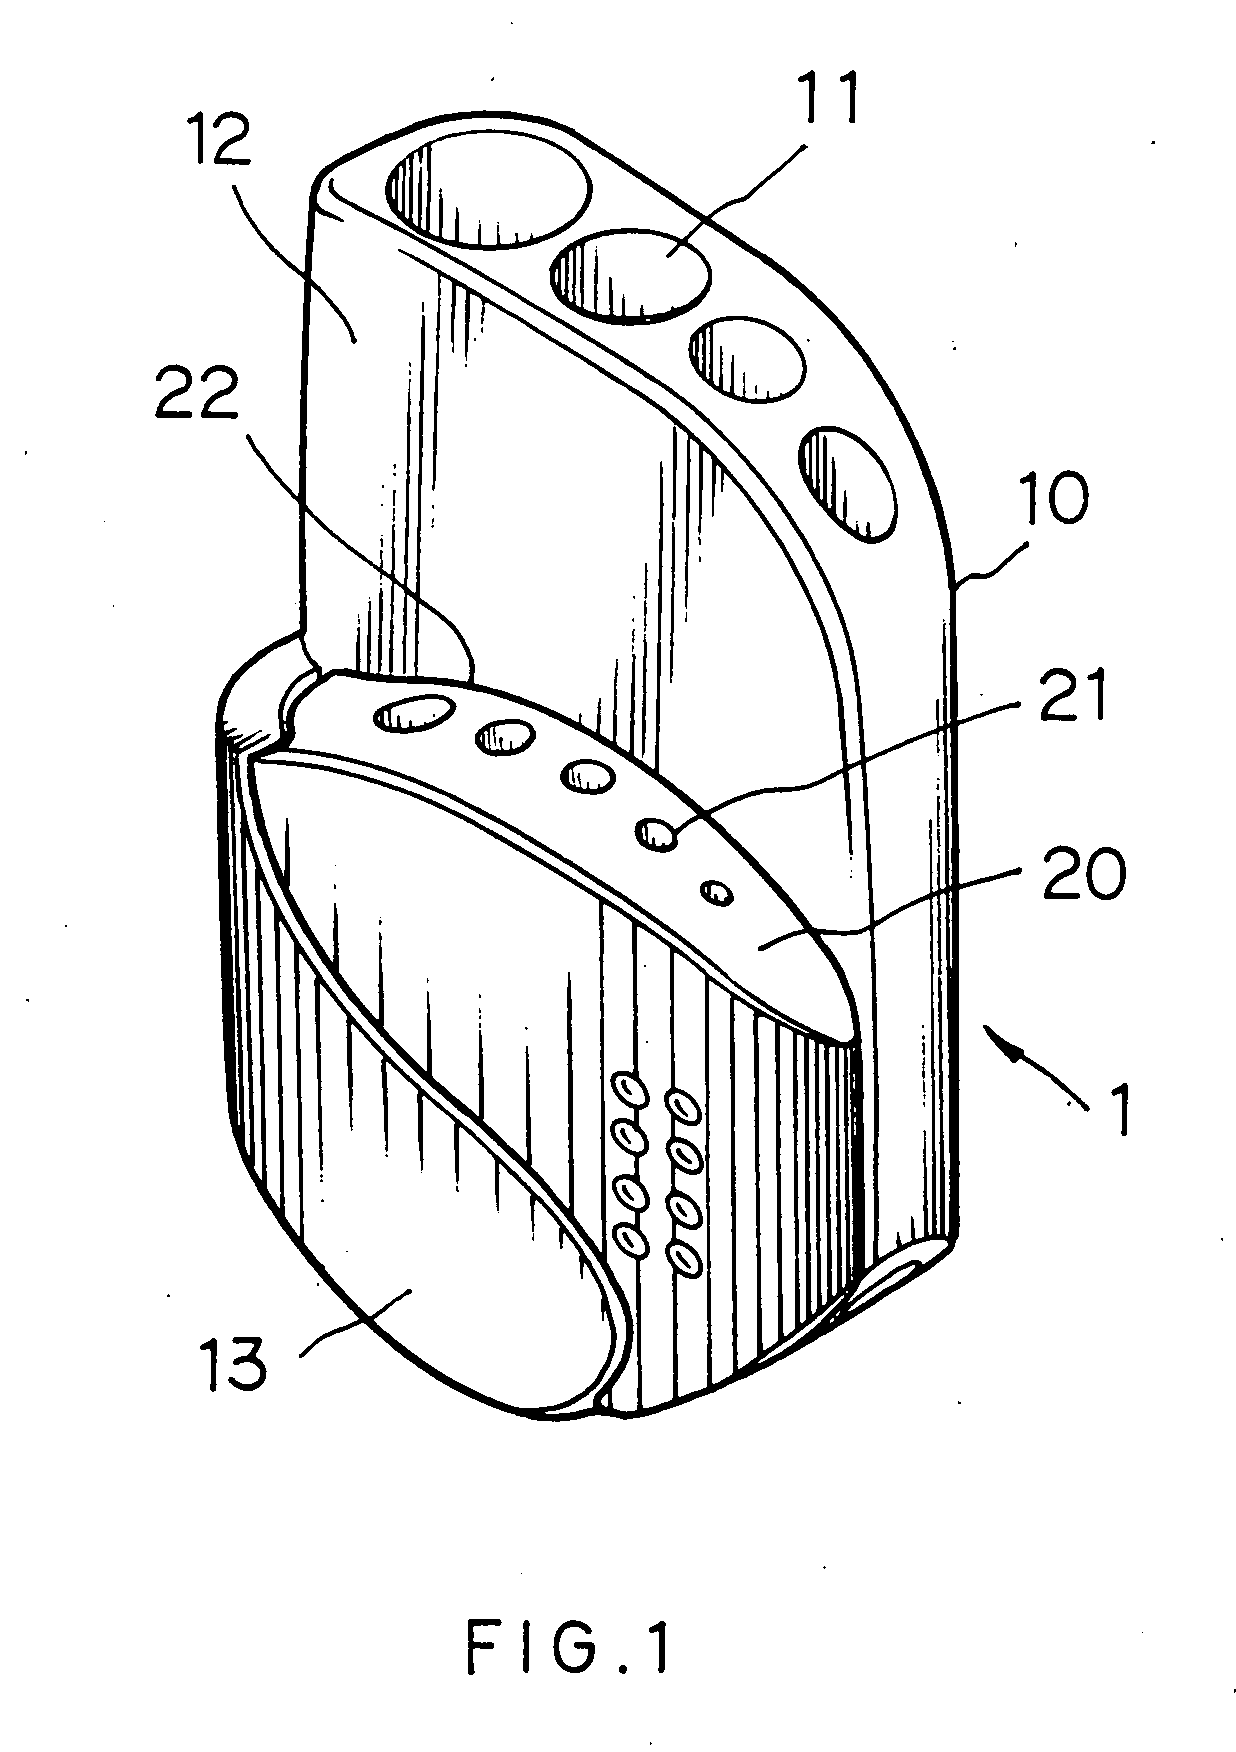 Hex key holder with mechanism for pivotably securing a smaller block to a larger block for facilitating access to hex keys in the smaller block